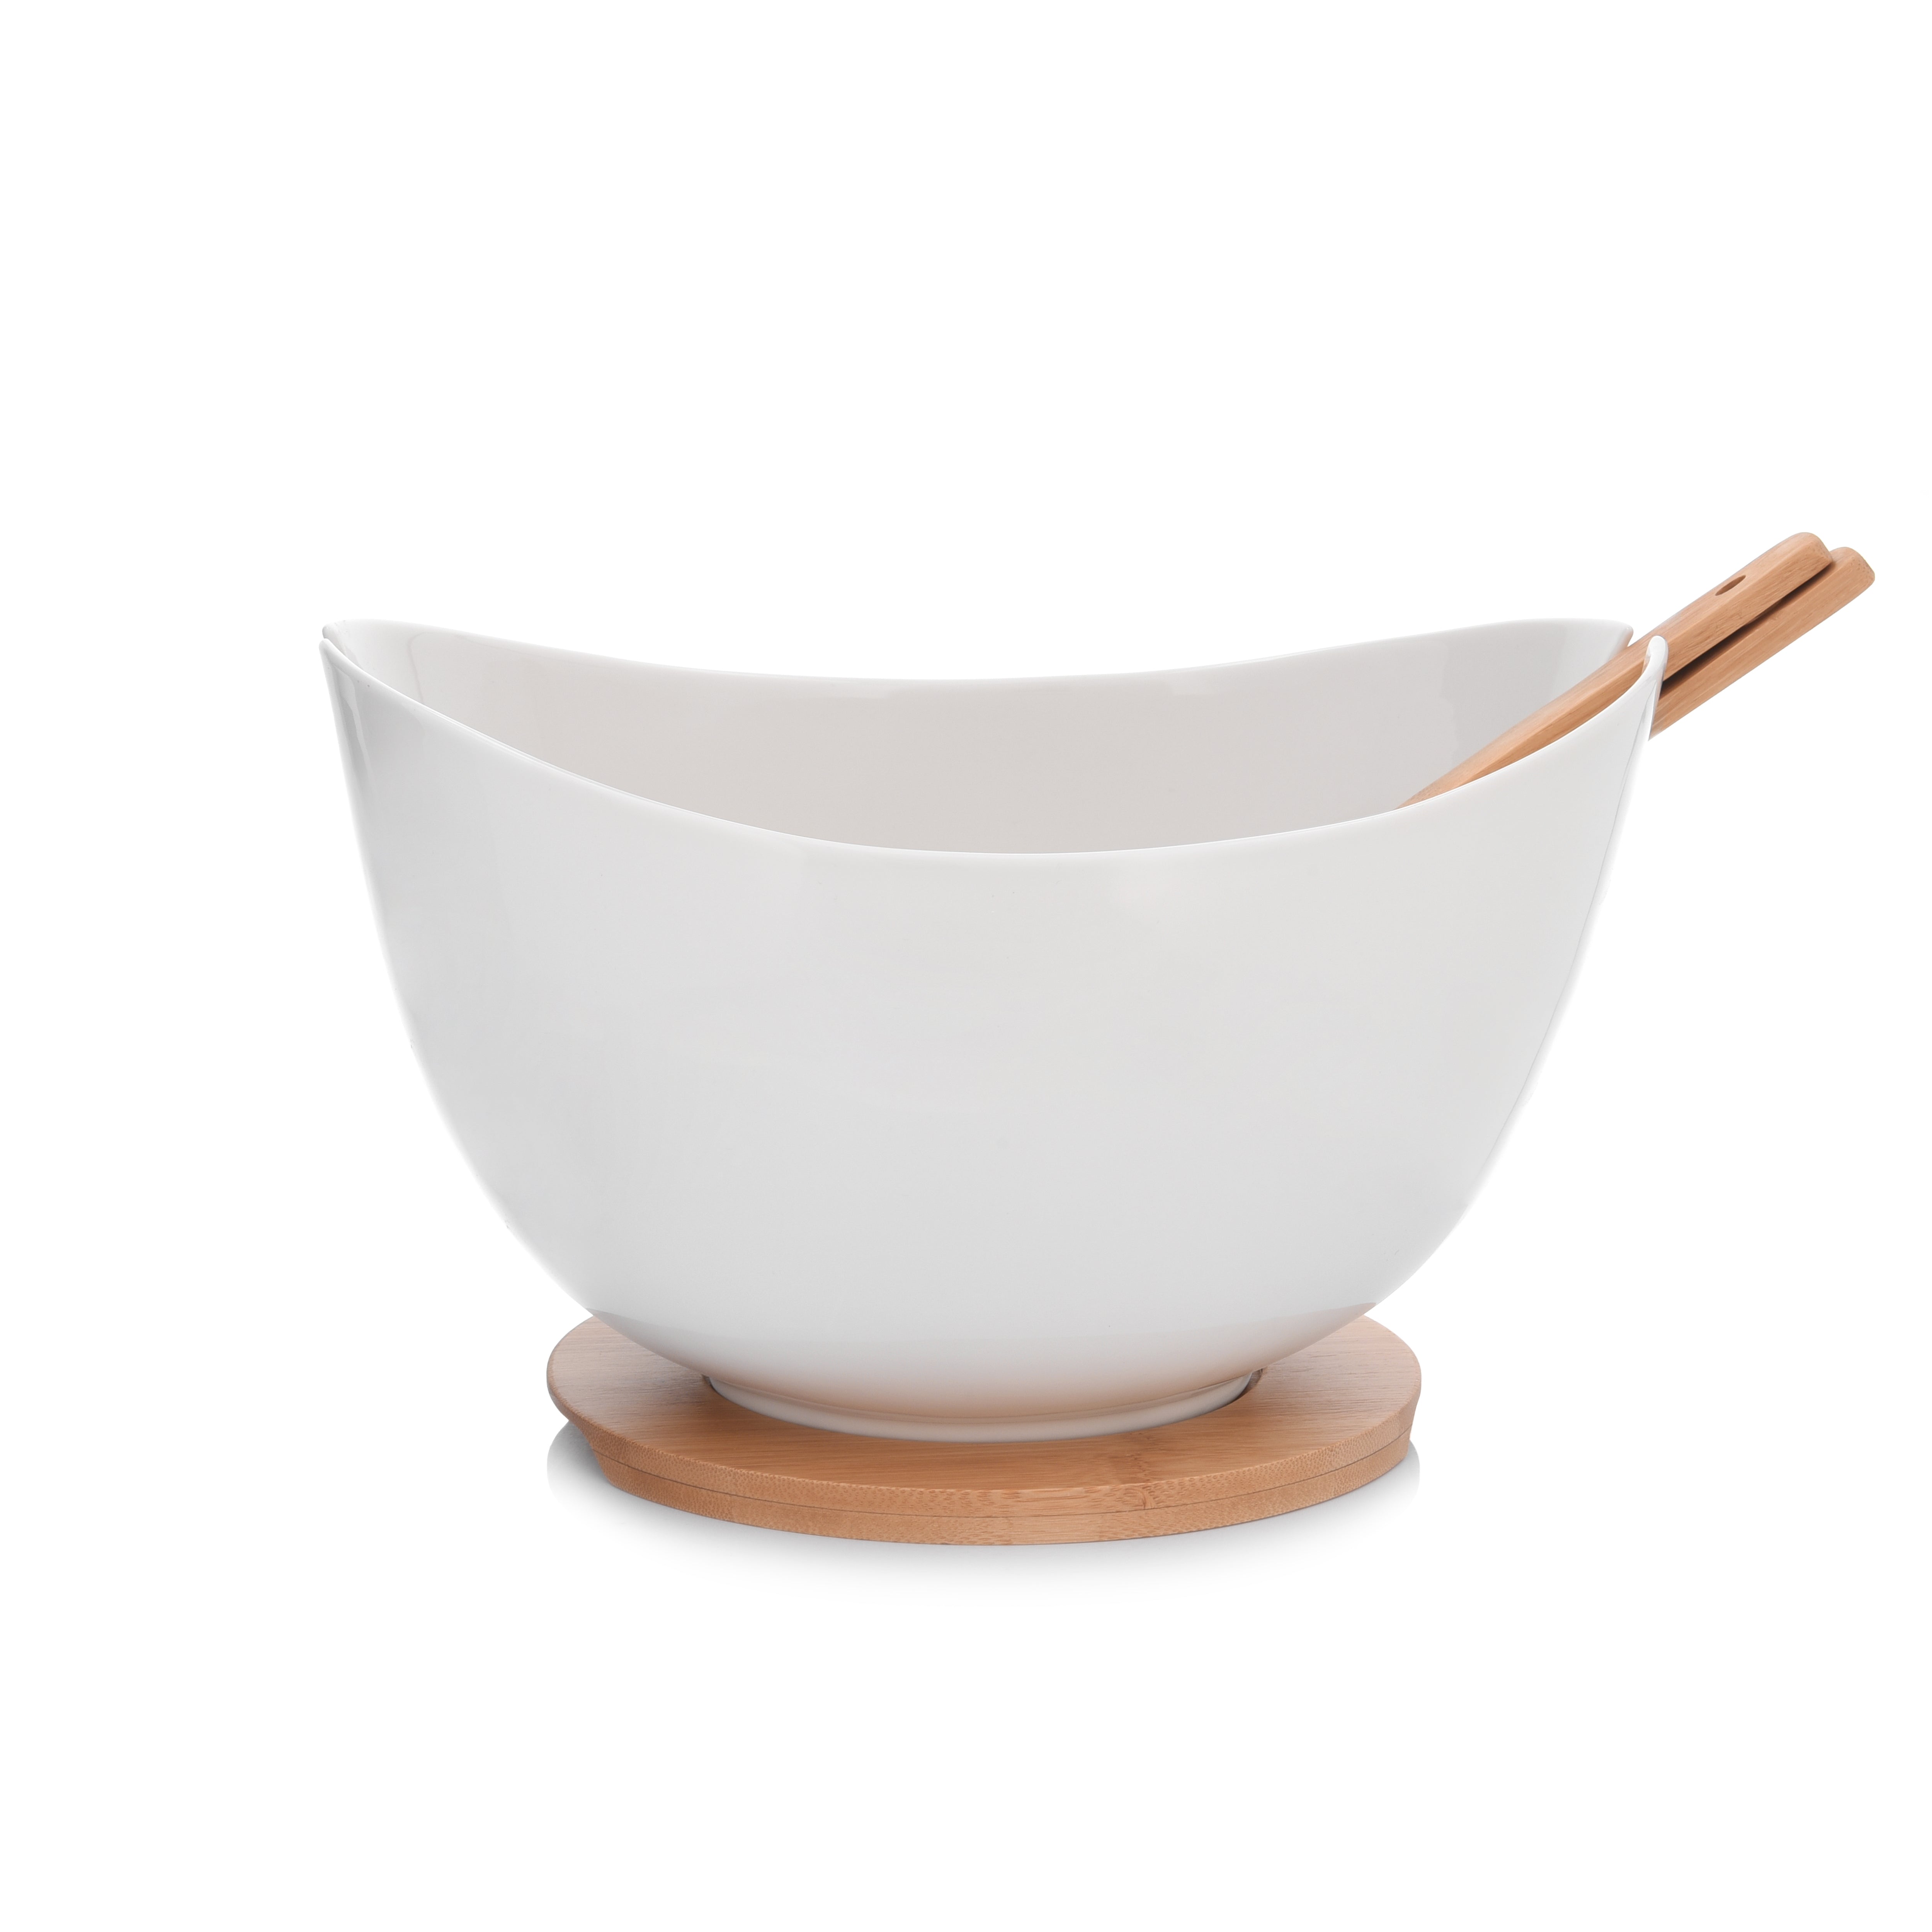 Large Salad Bowl with Wood Base and Bamboo Serving Utensils